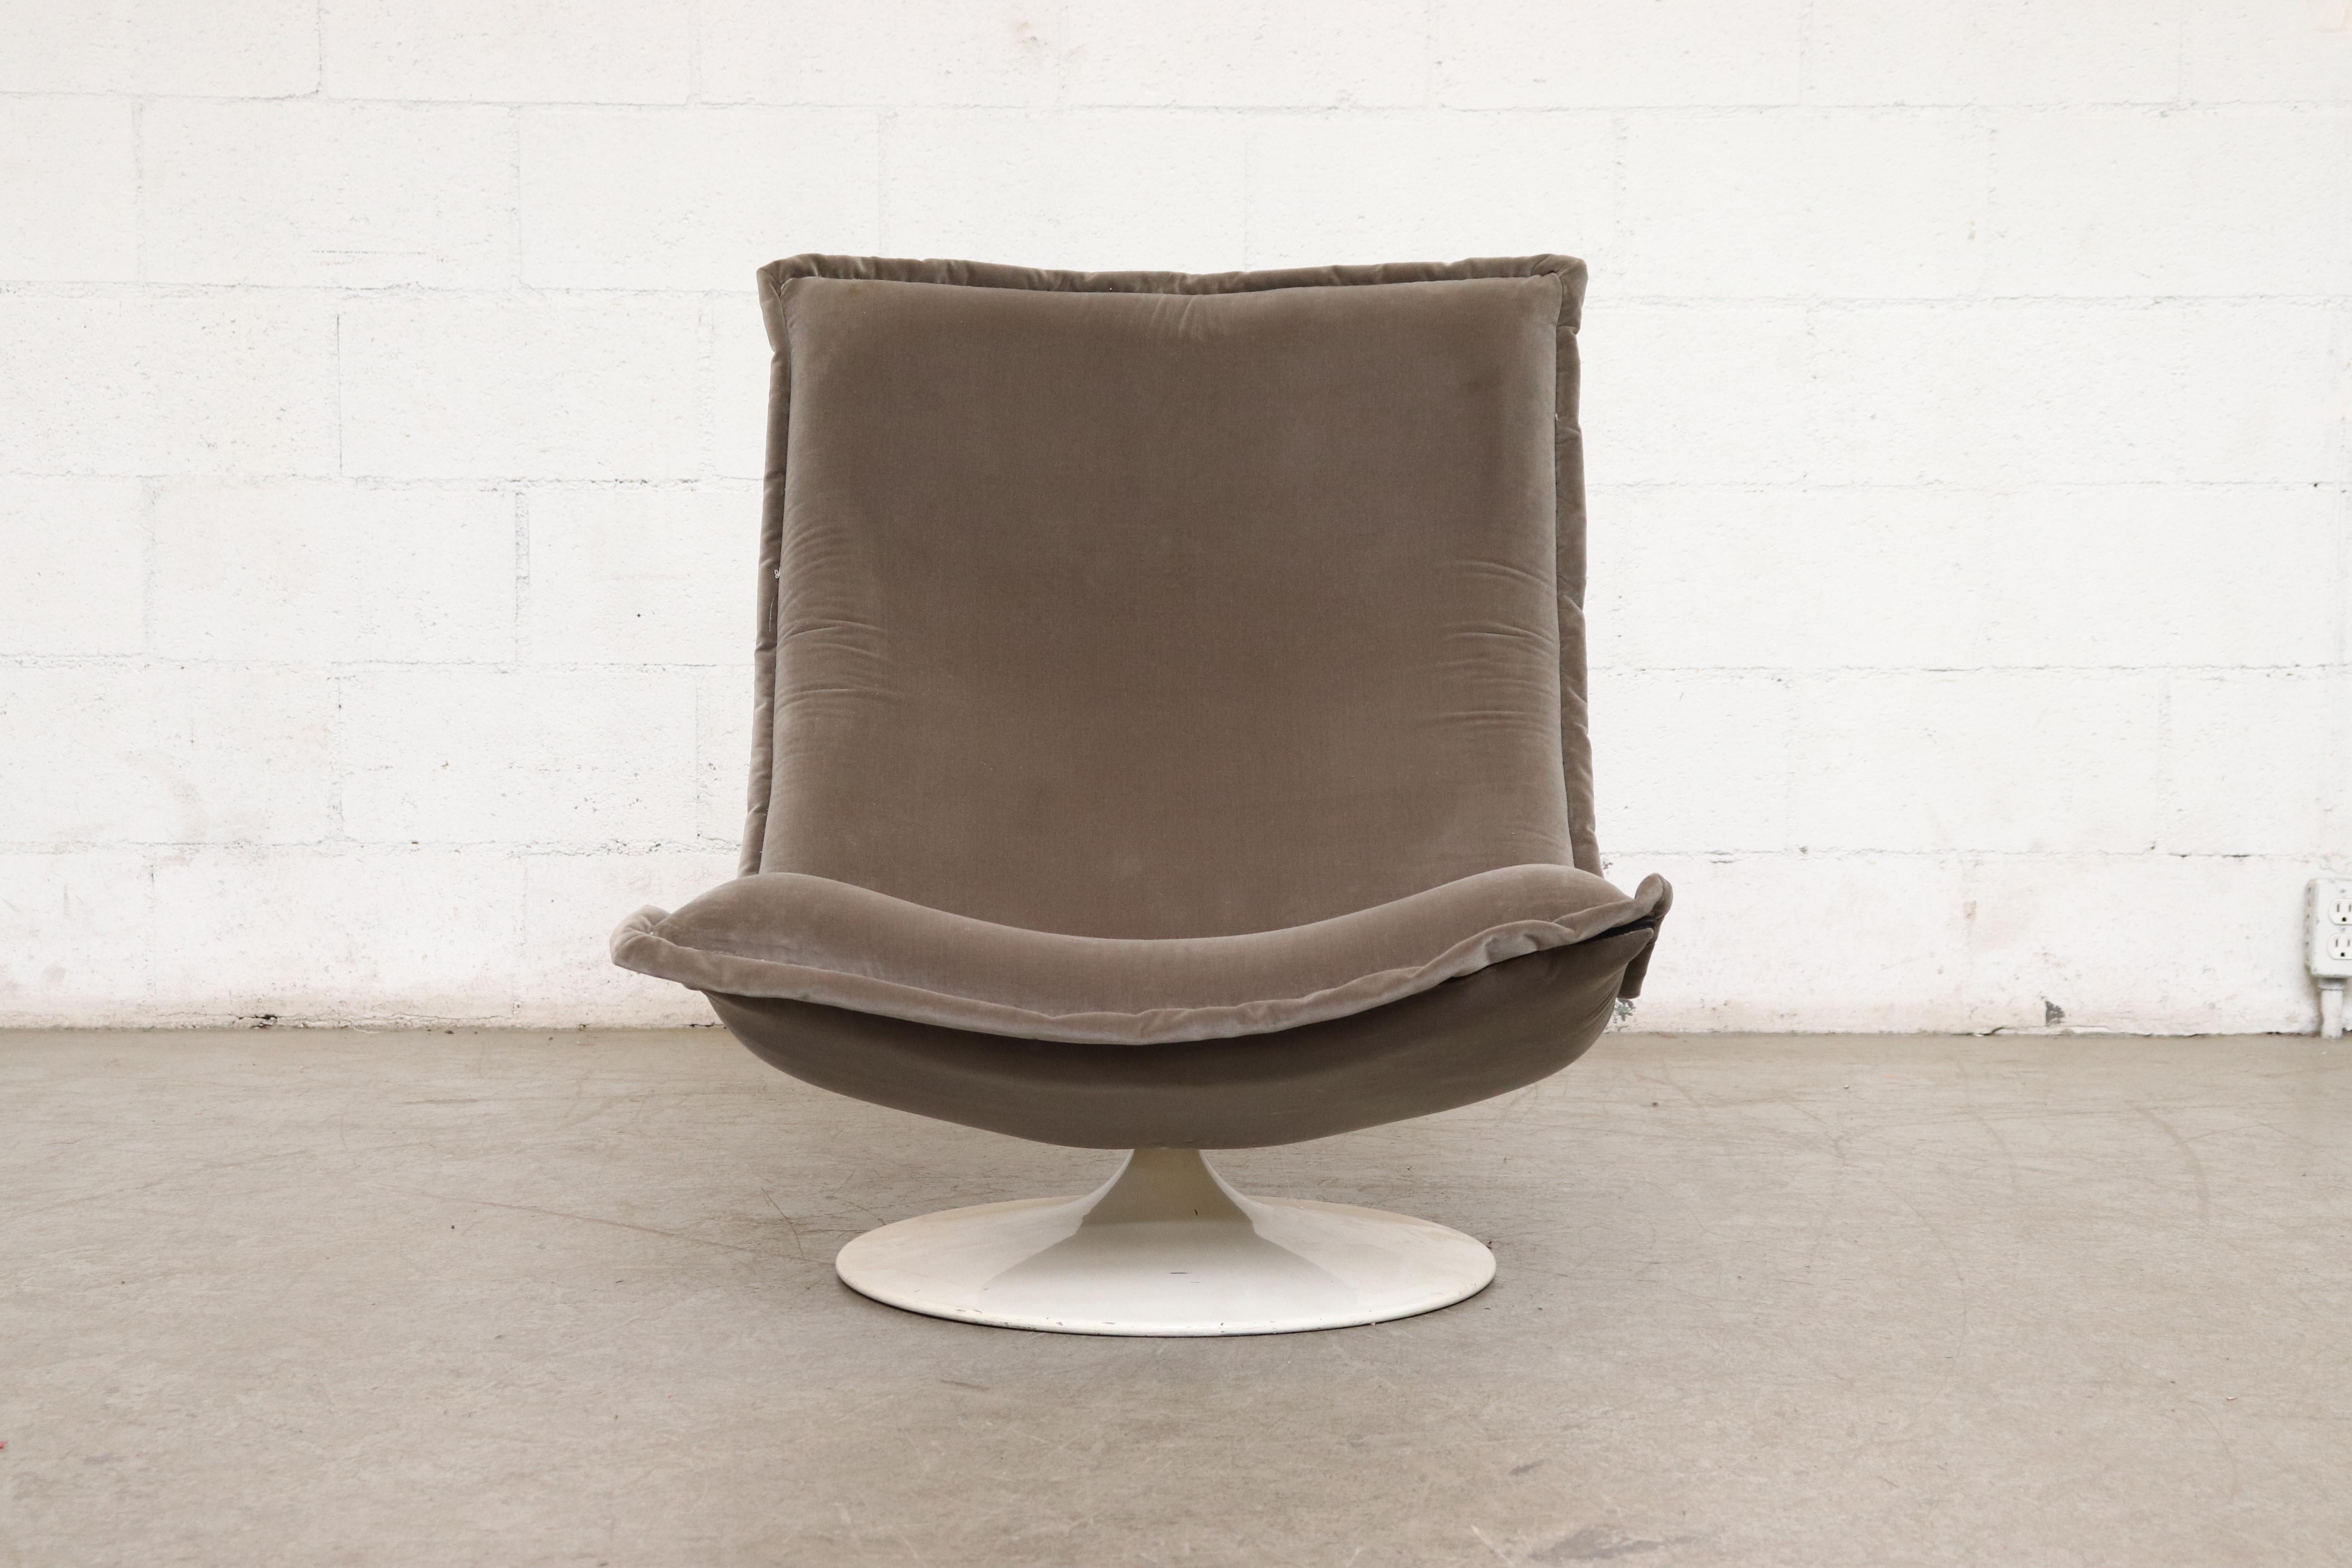 Rare midcentury armless swivel lounge chair by Geoffrey Harcourt with Saarinen inspired base. Newly upholstered in seal grey velvet. Slight wear and scratching to base, consistent with age and use. Good original condition.